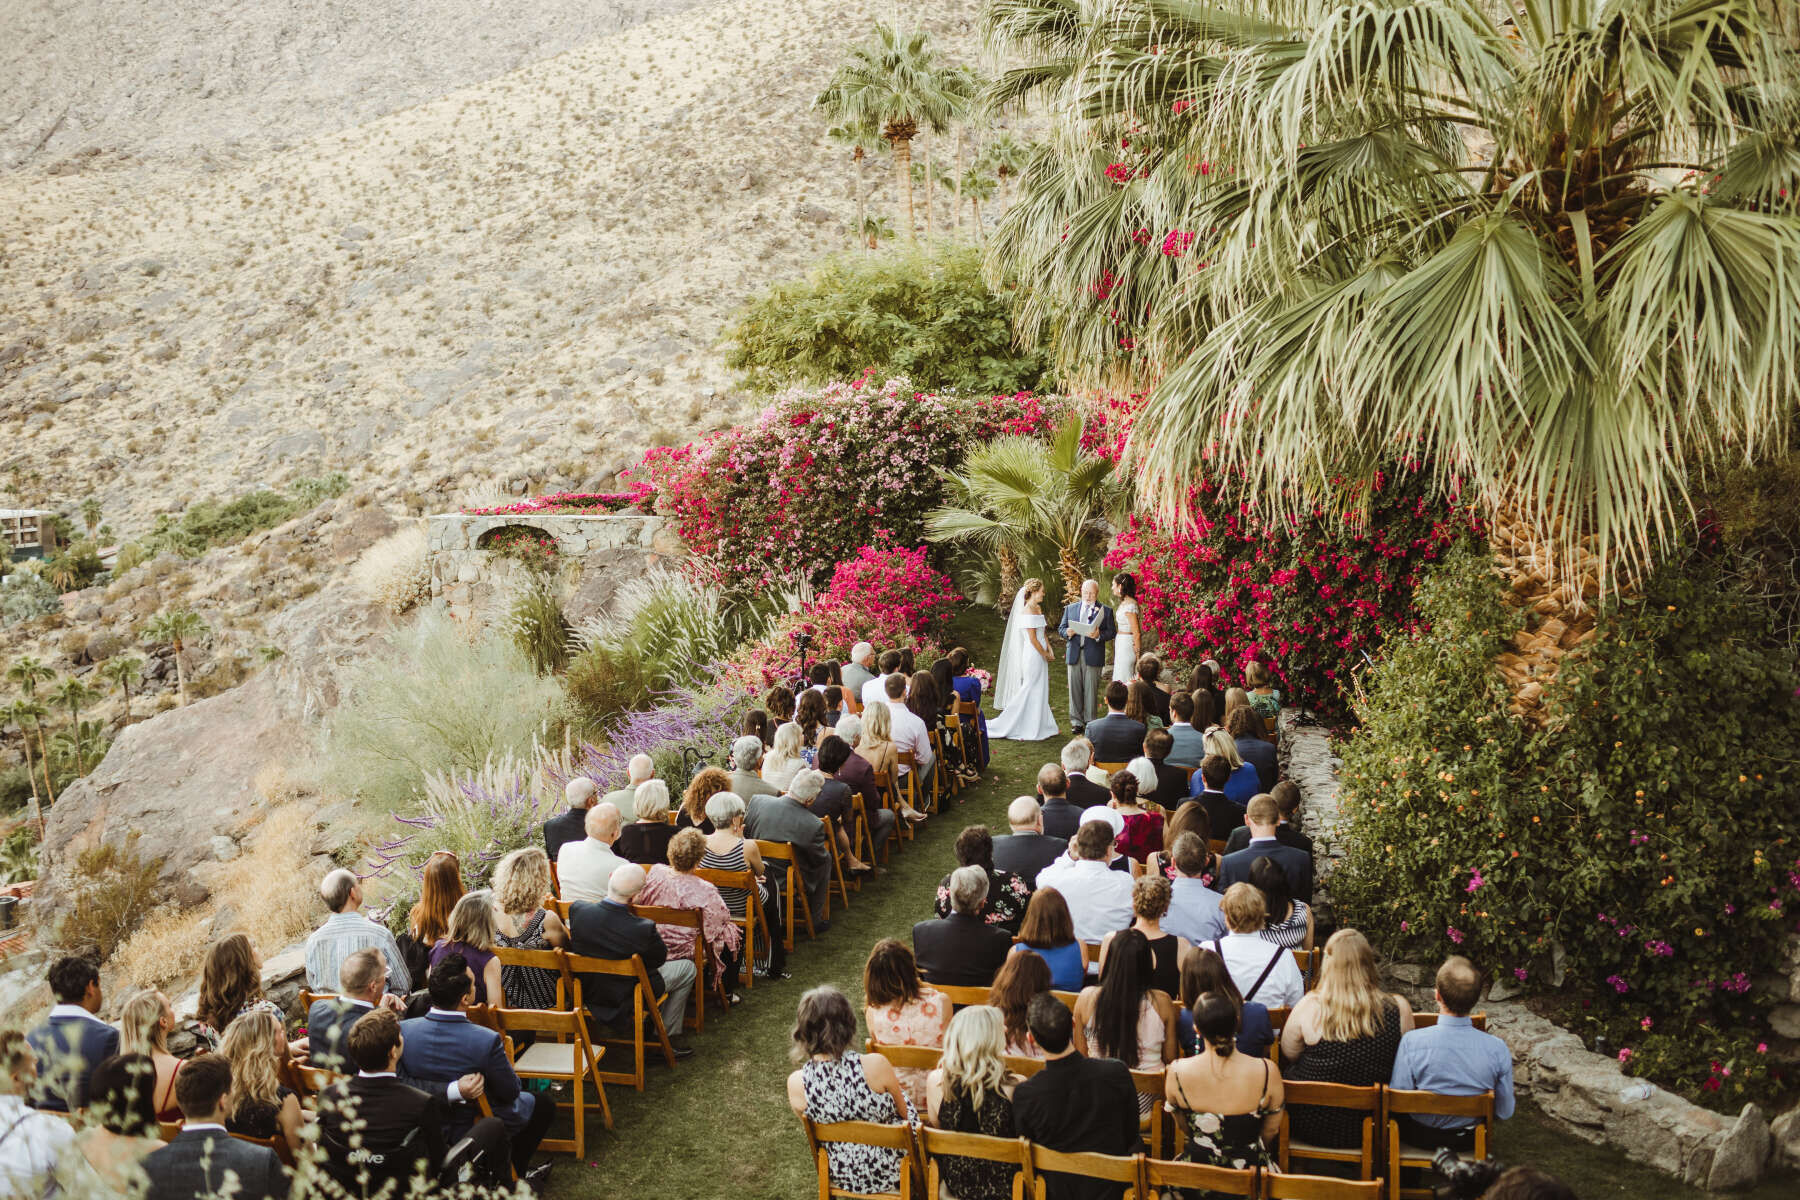 Pink Wedding: Two brides, their officiant, and guests at an outdoor ceremony in the California desert.